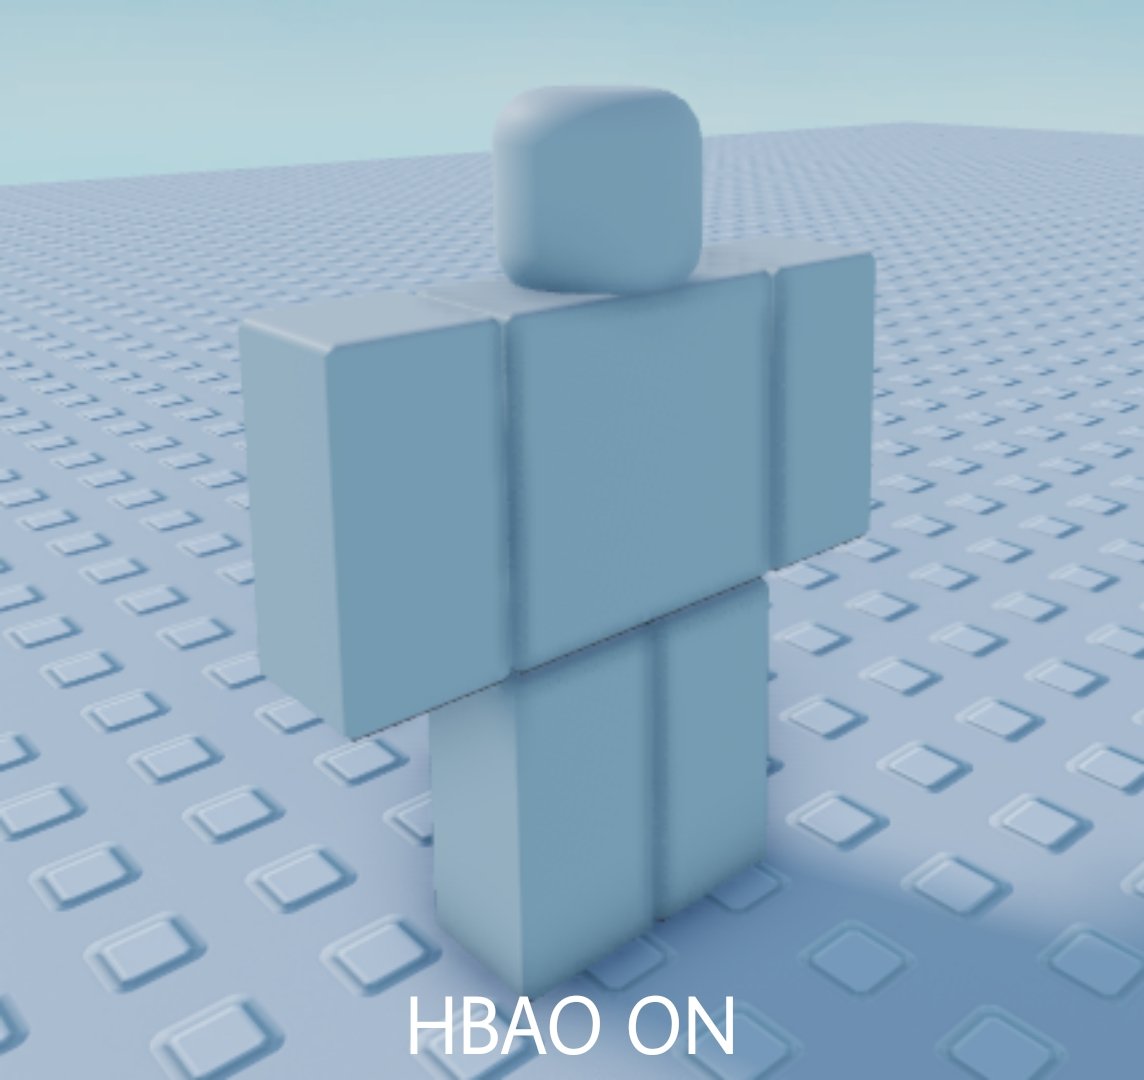 Max ツ On Twitter Roblox Is Probably Getting Hbao Support Soon Lol - how to add ambience to roblox